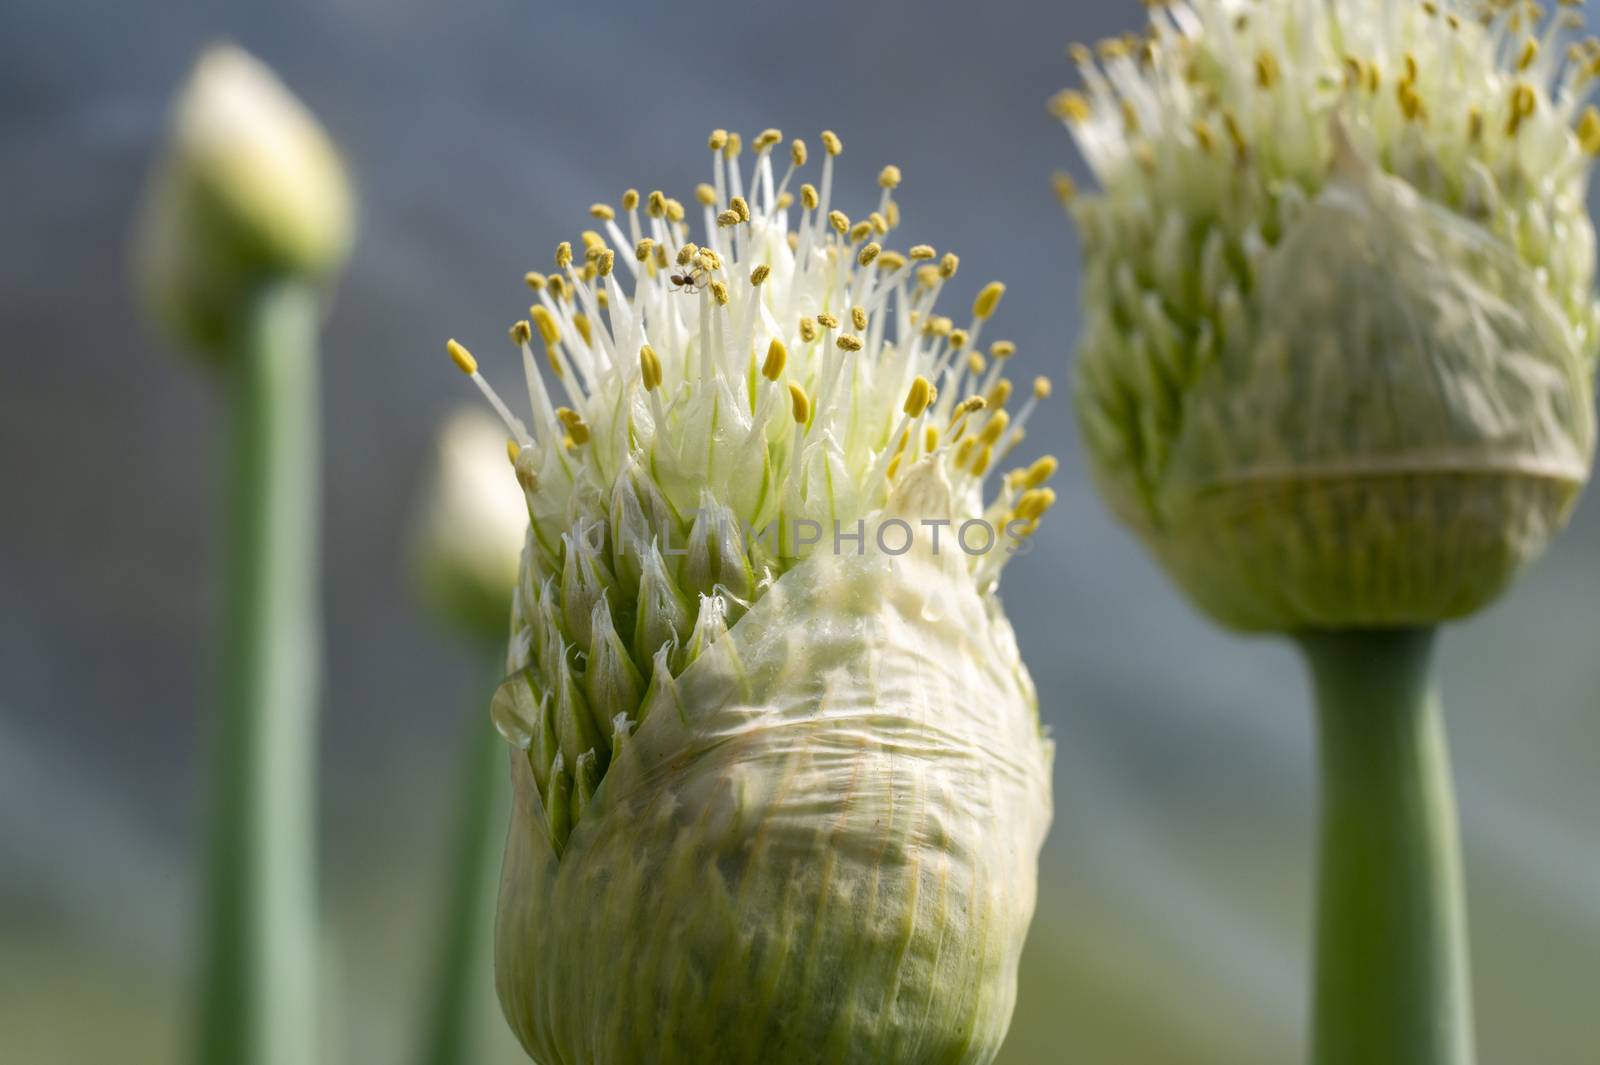 Green onion flower buds opening in close up